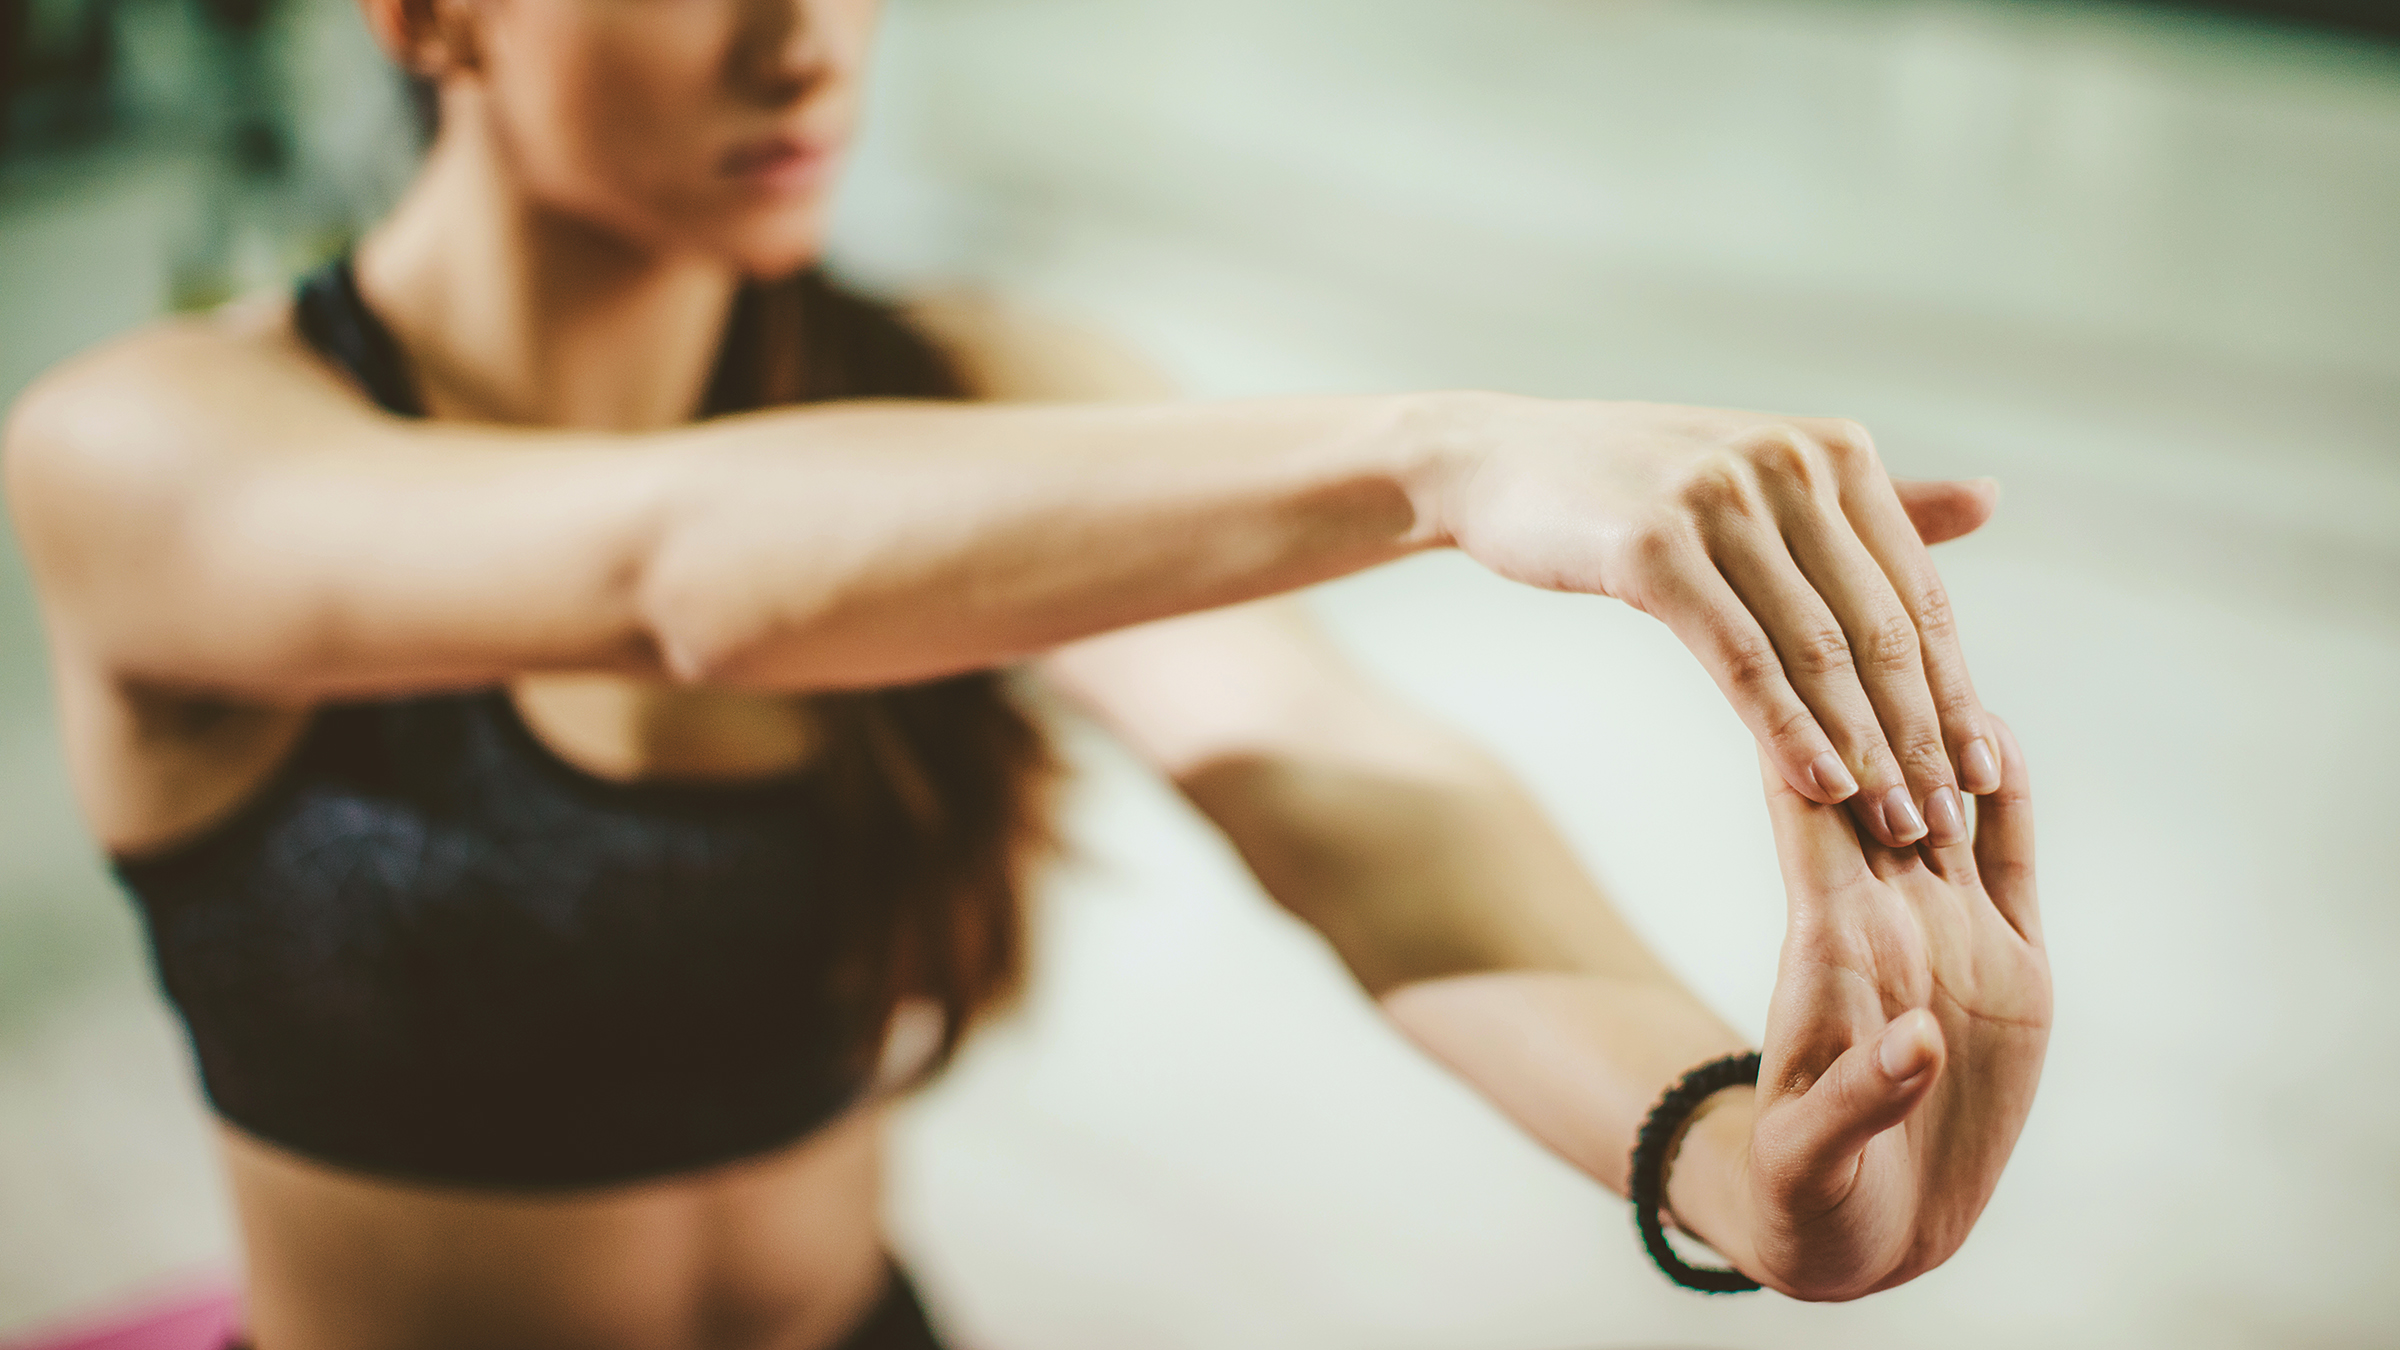 5 Wrist Stretches That Can Relieve Hand and Wrist Pain - GoodRx